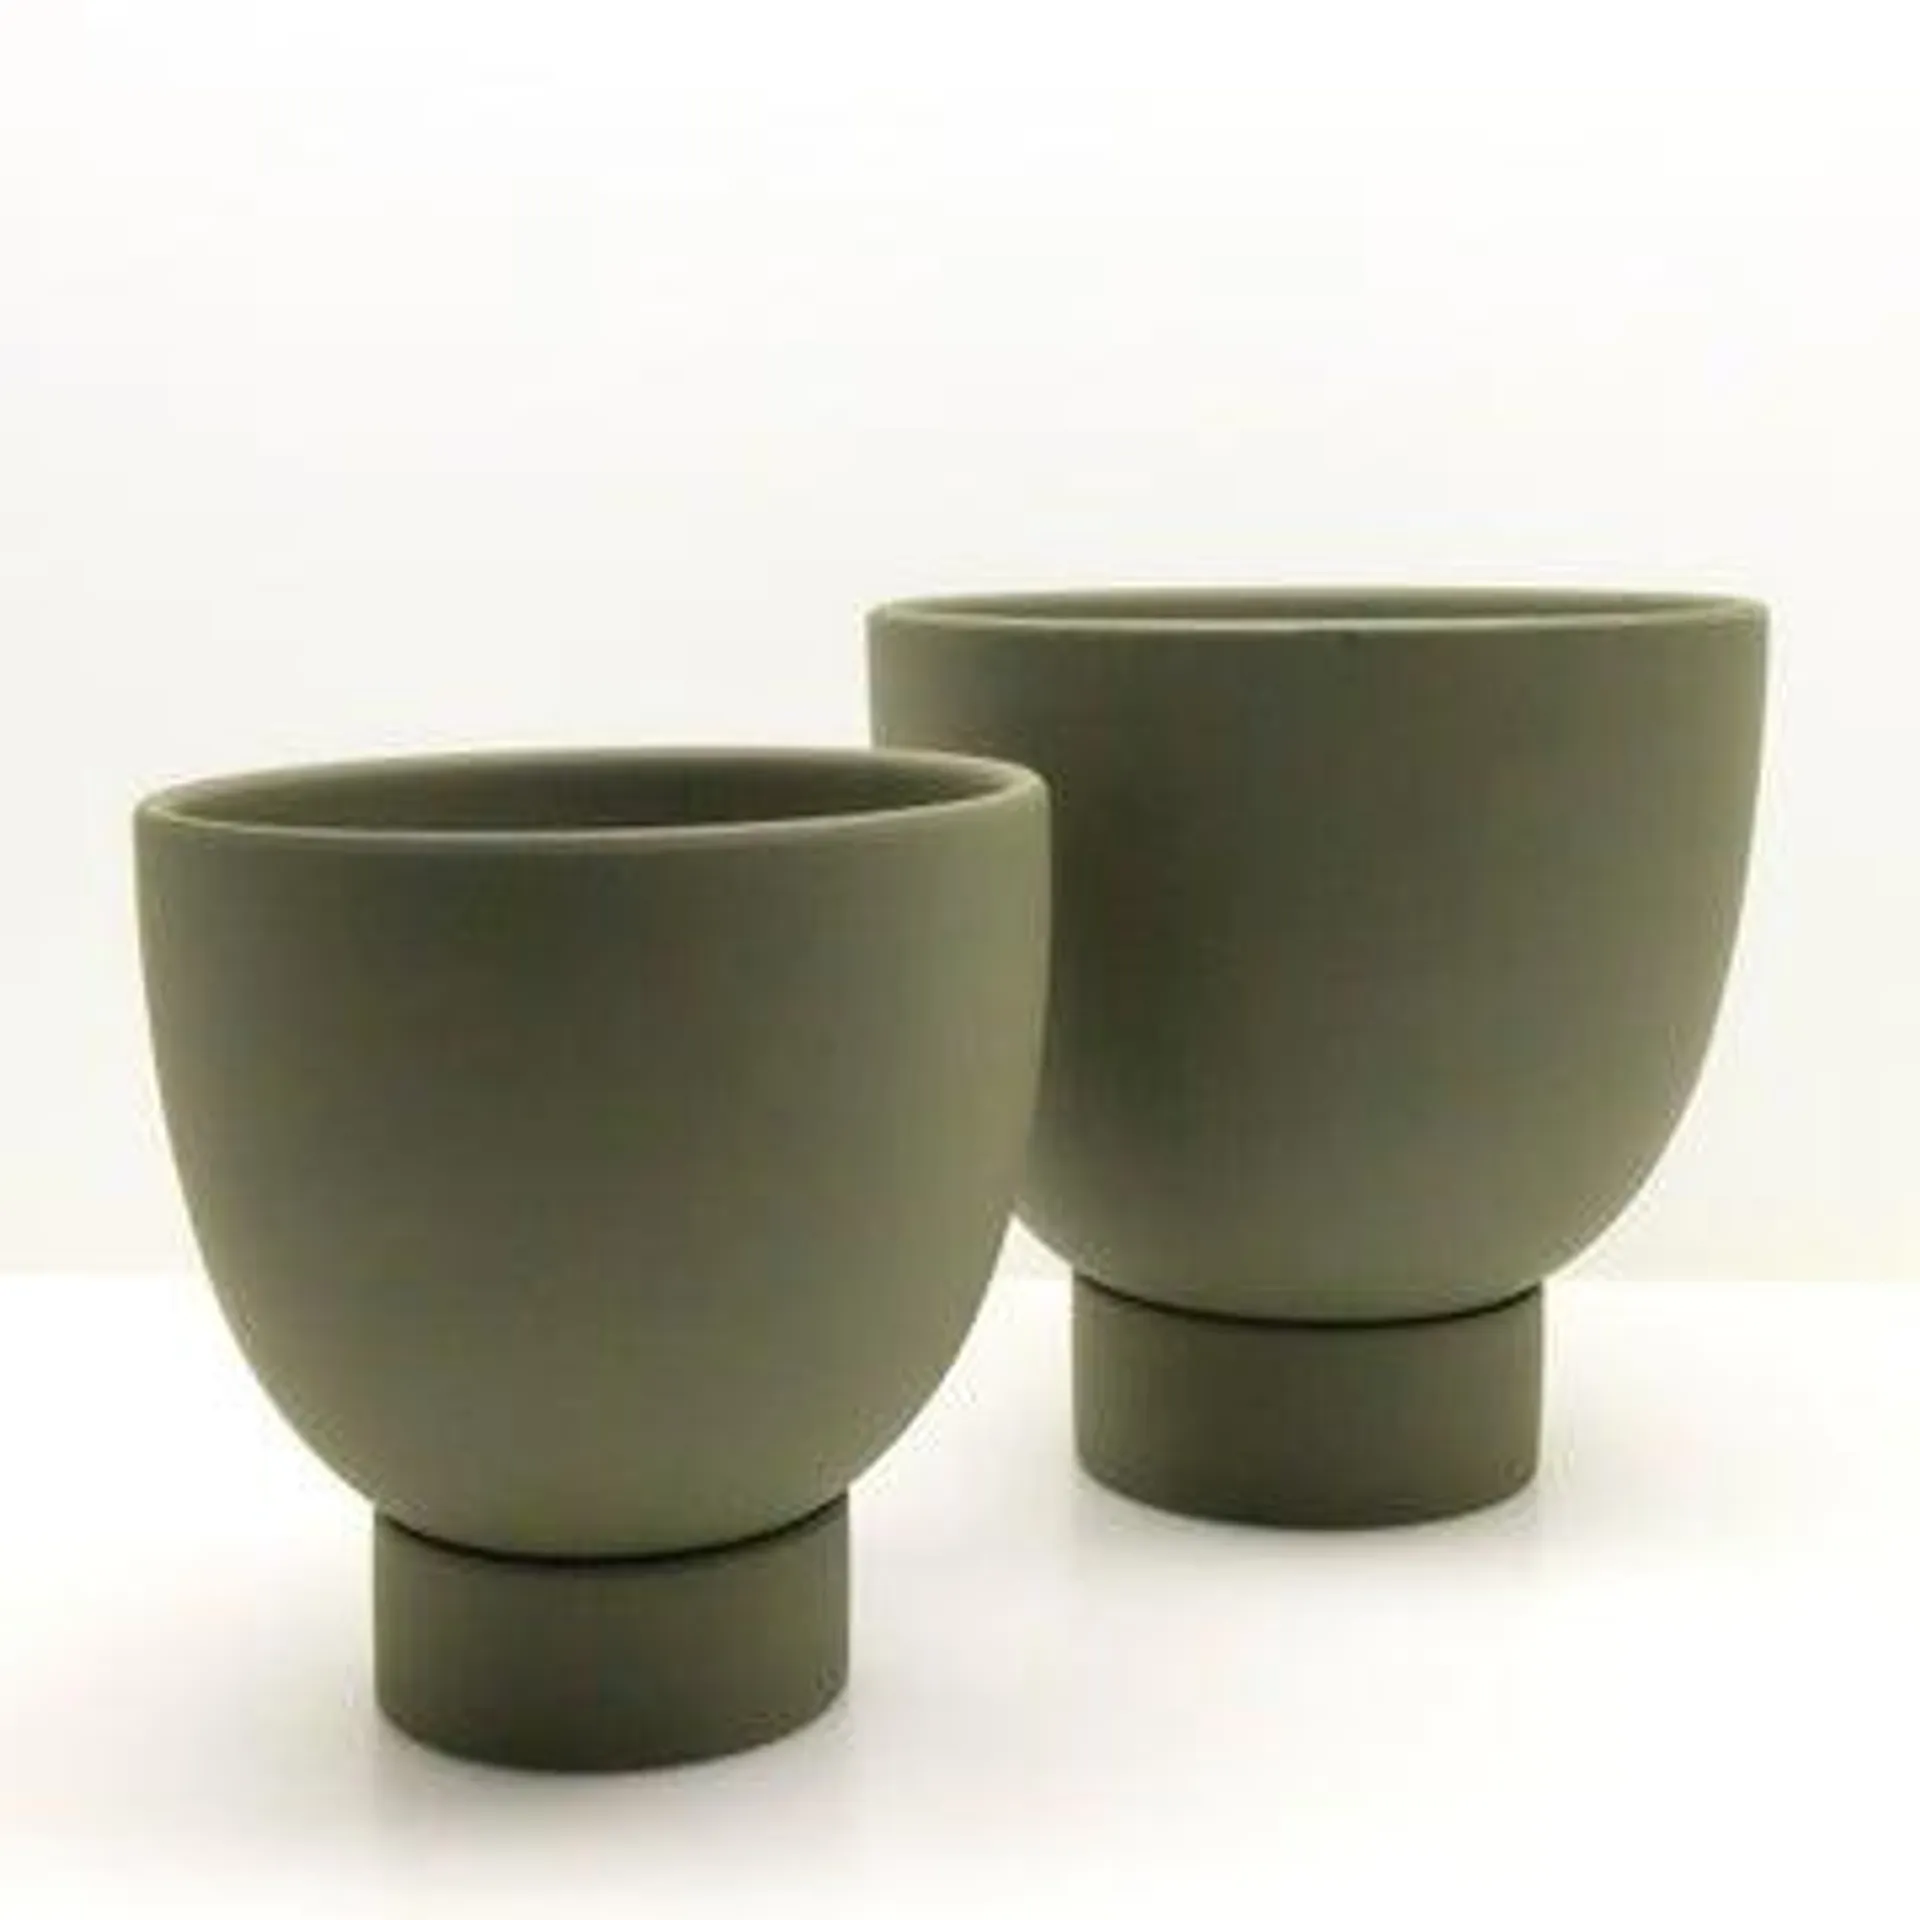 Bella Pot and Saucer - Forest - 2pc